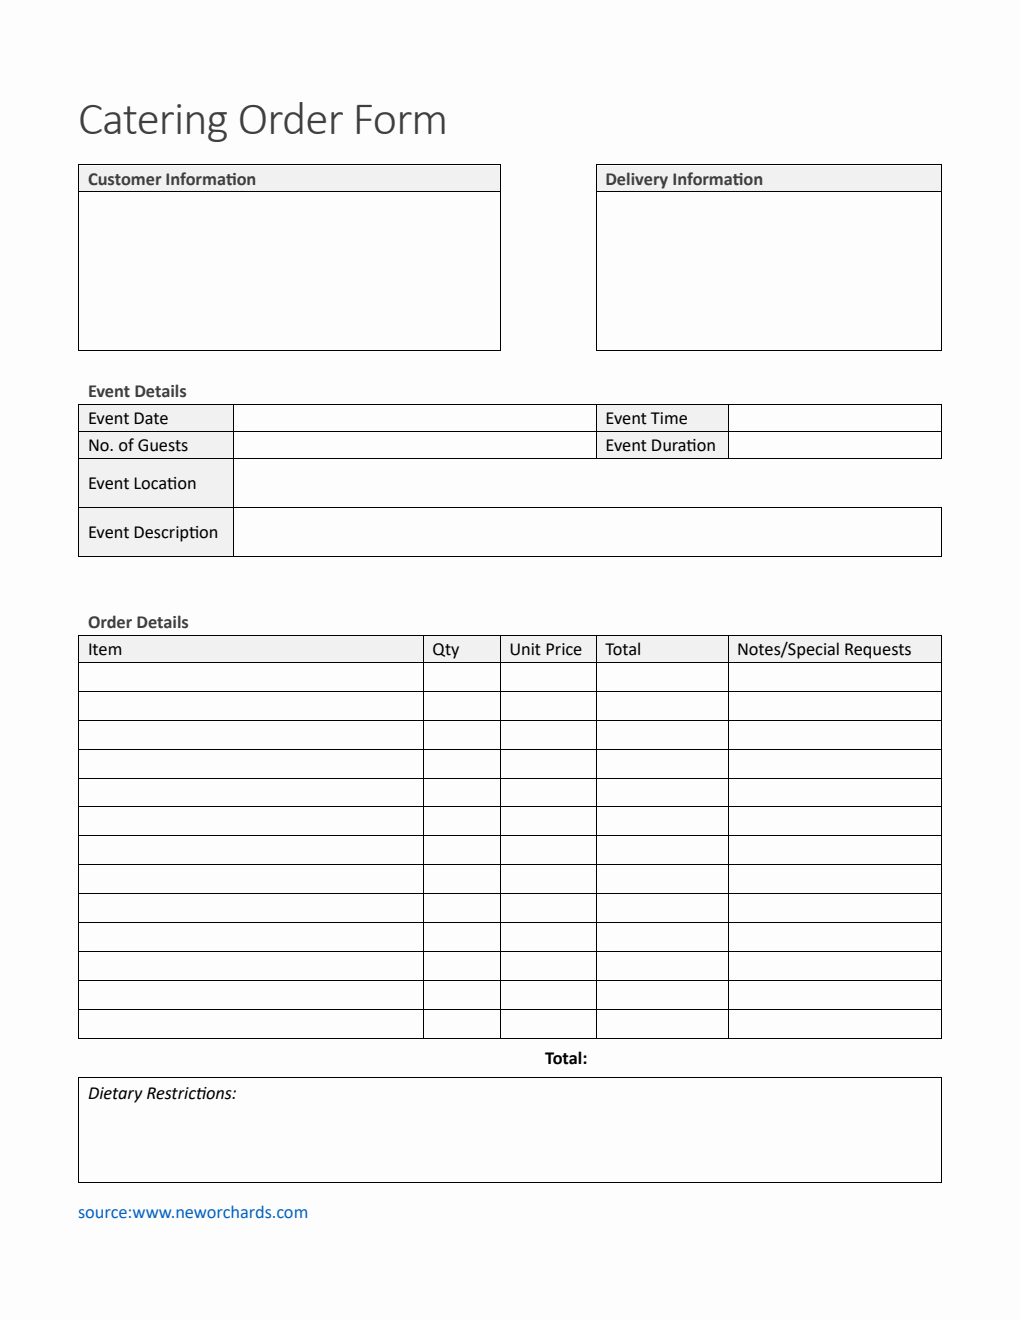 Basic Catering Order Form Template in PDF